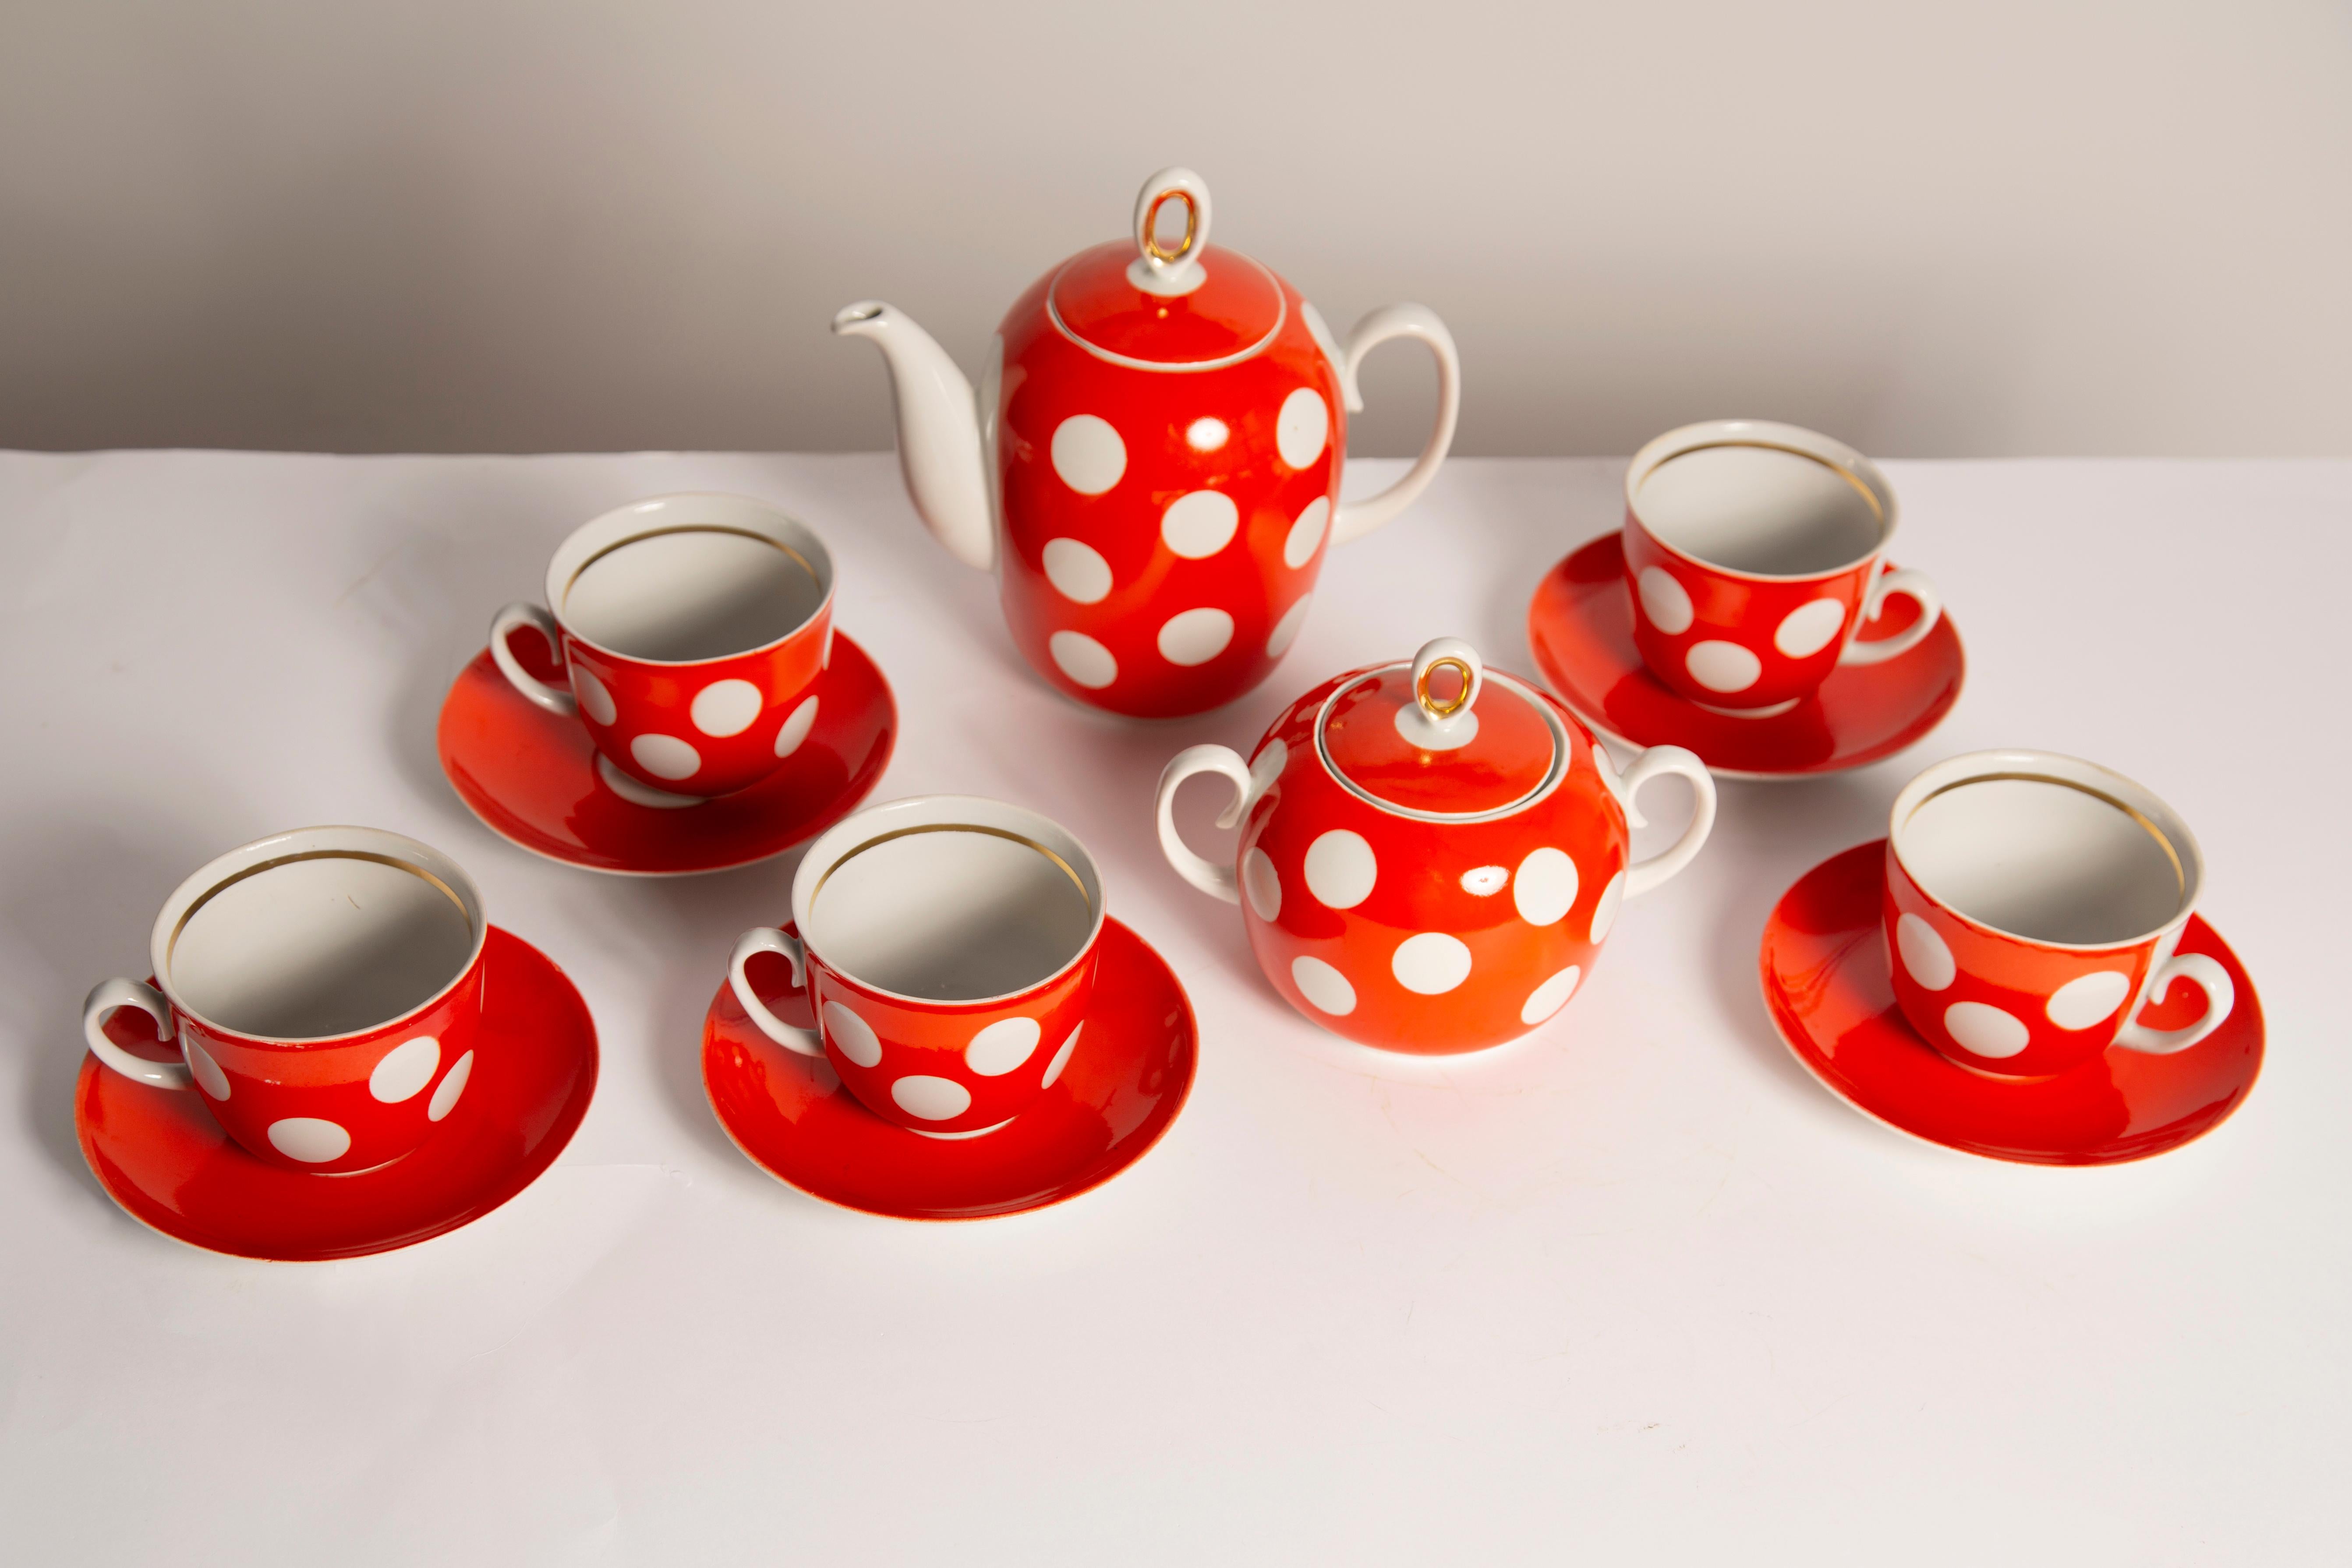 Midcentury Porcelain Red Dots Tea Coffee Service Jug and Cups, Poland, 1960 For Sale 2